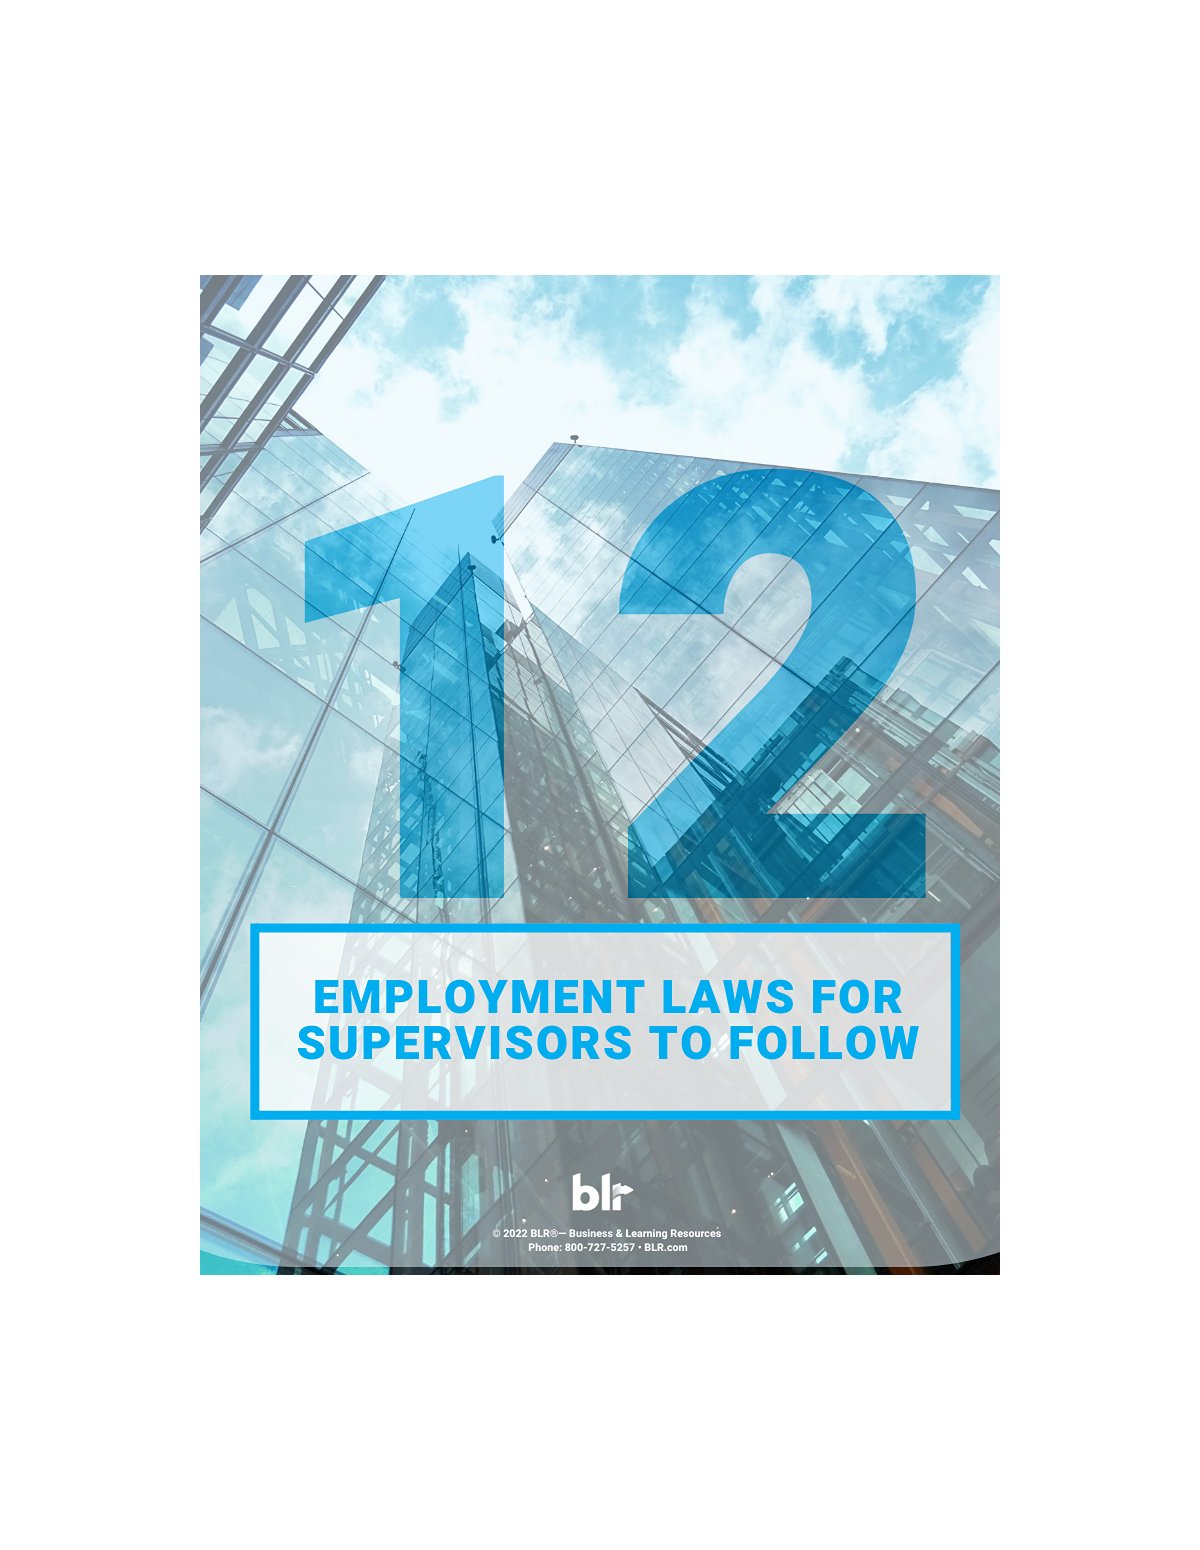 12 Employment Laws for Supervisors to Follow​